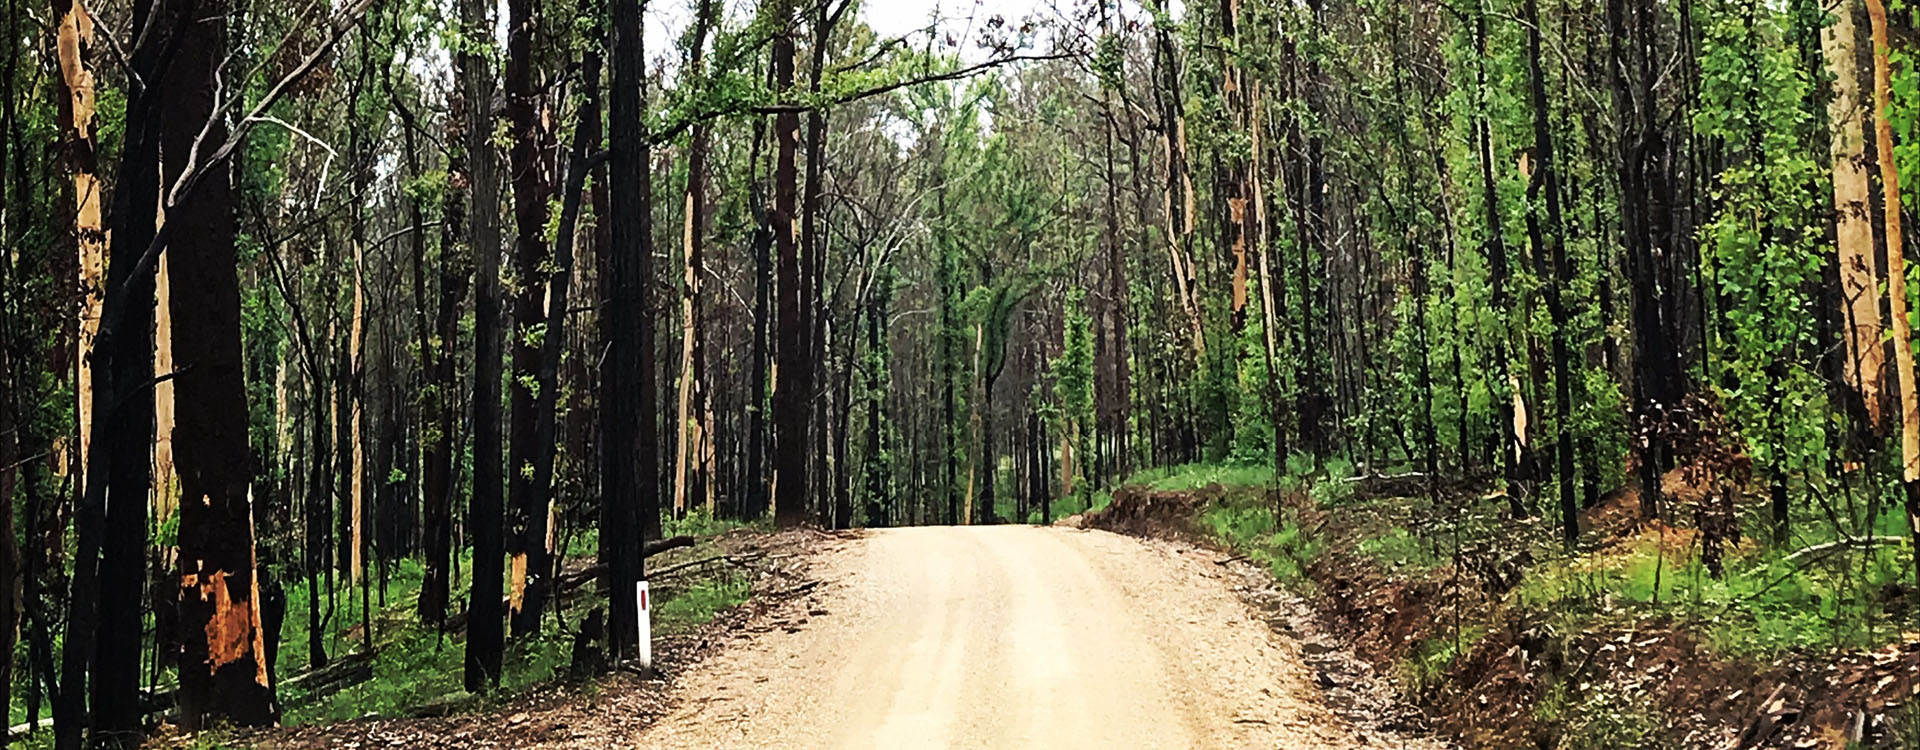 Regrowth along a dirt road after NSW Bushfire Clean-Up Program's community engagement efforts